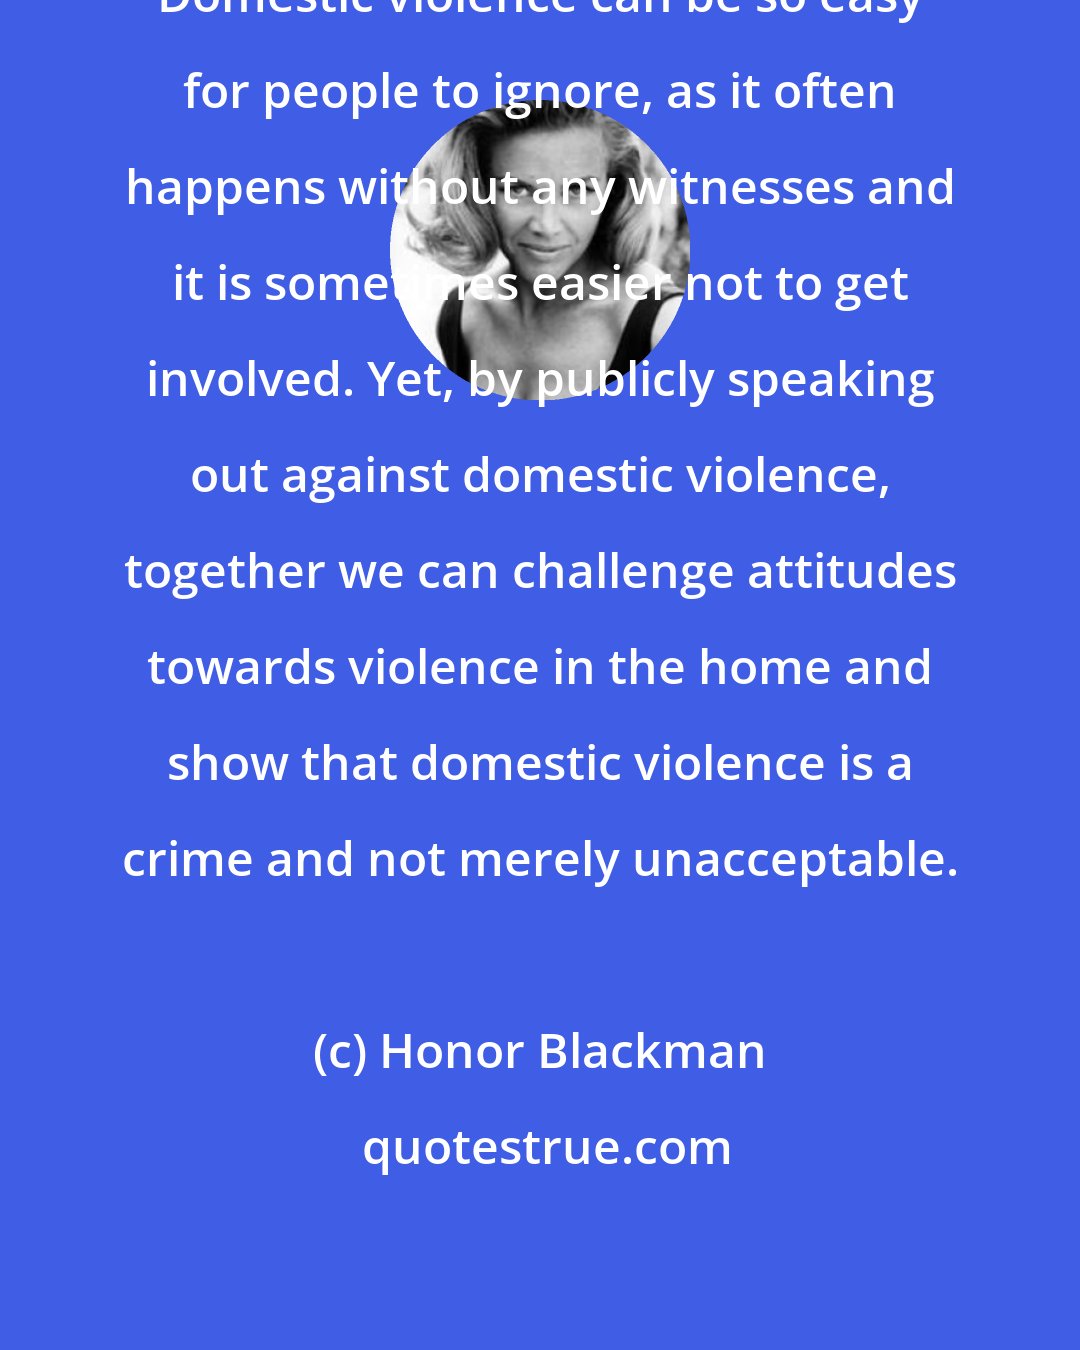 Honor Blackman: Domestic violence can be so easy for people to ignore, as it often happens without any witnesses and it is sometimes easier not to get involved. Yet, by publicly speaking out against domestic violence, together we can challenge attitudes towards violence in the home and show that domestic violence is a crime and not merely unacceptable.